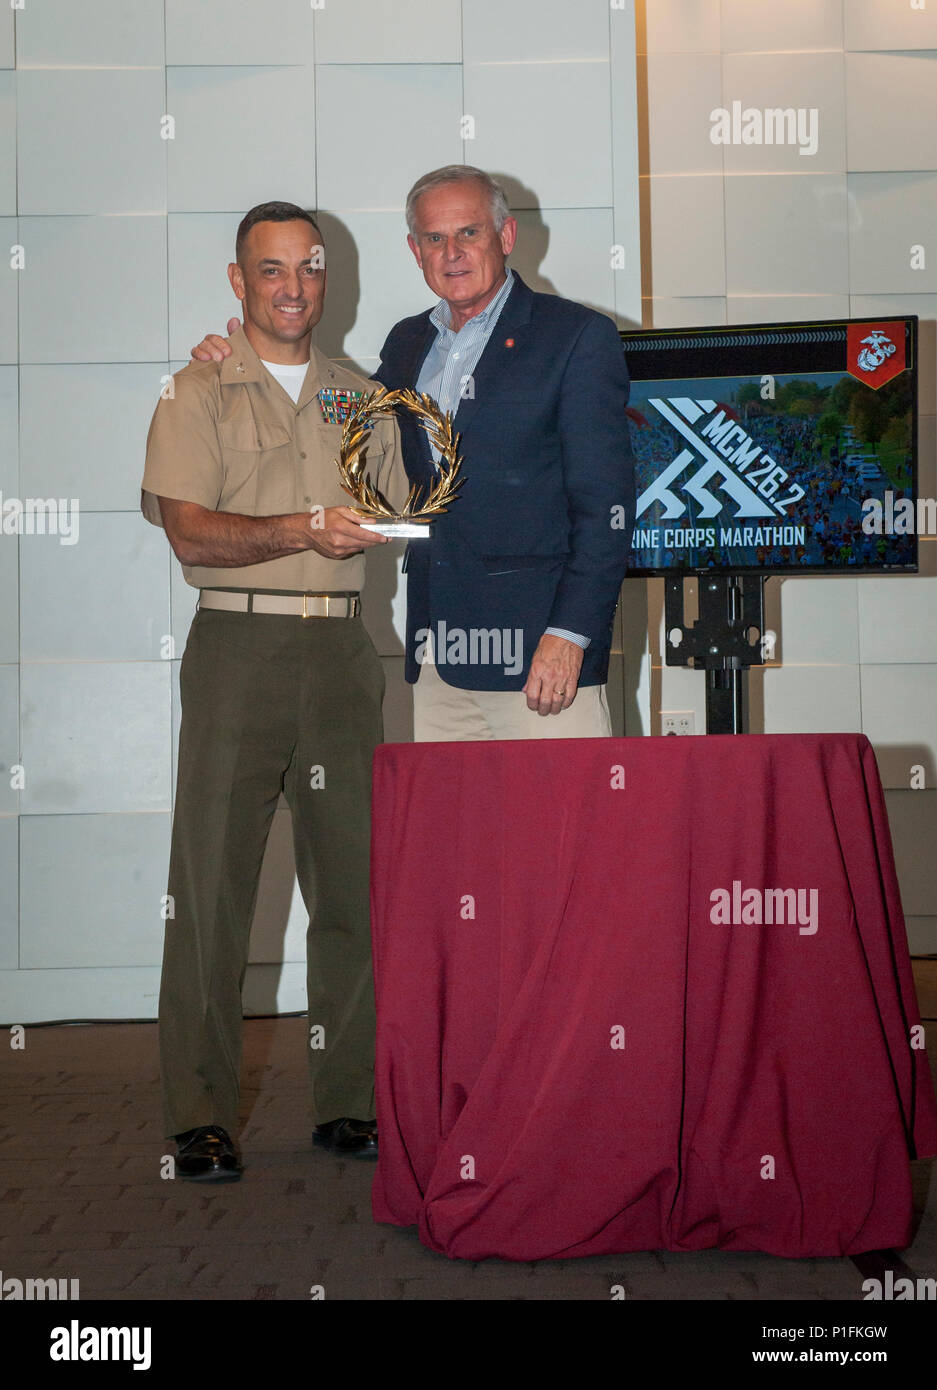 U.S. Marine Corps Col. Joseph Murray, commanding officer of Marine Corps Base Quantico, holds a golden laurel which will be presented at the awards ceremony to the top female and male finishers of the 41st Marine Corps Marathon (MCM), with Timothy Kilduff, executive director of the 41st MCM at the Wolfgang Puck Catering and Events Center at National Harbor, Md., Oct. 28, 2016. Also known as 'The People's Marathon,' the 26.2 mile race drew roughly 30,000 participants to promote physical fitness, generate goodwill in the community, and showcase the organizational skills of the Marine Corps. (U.S Stock Photo